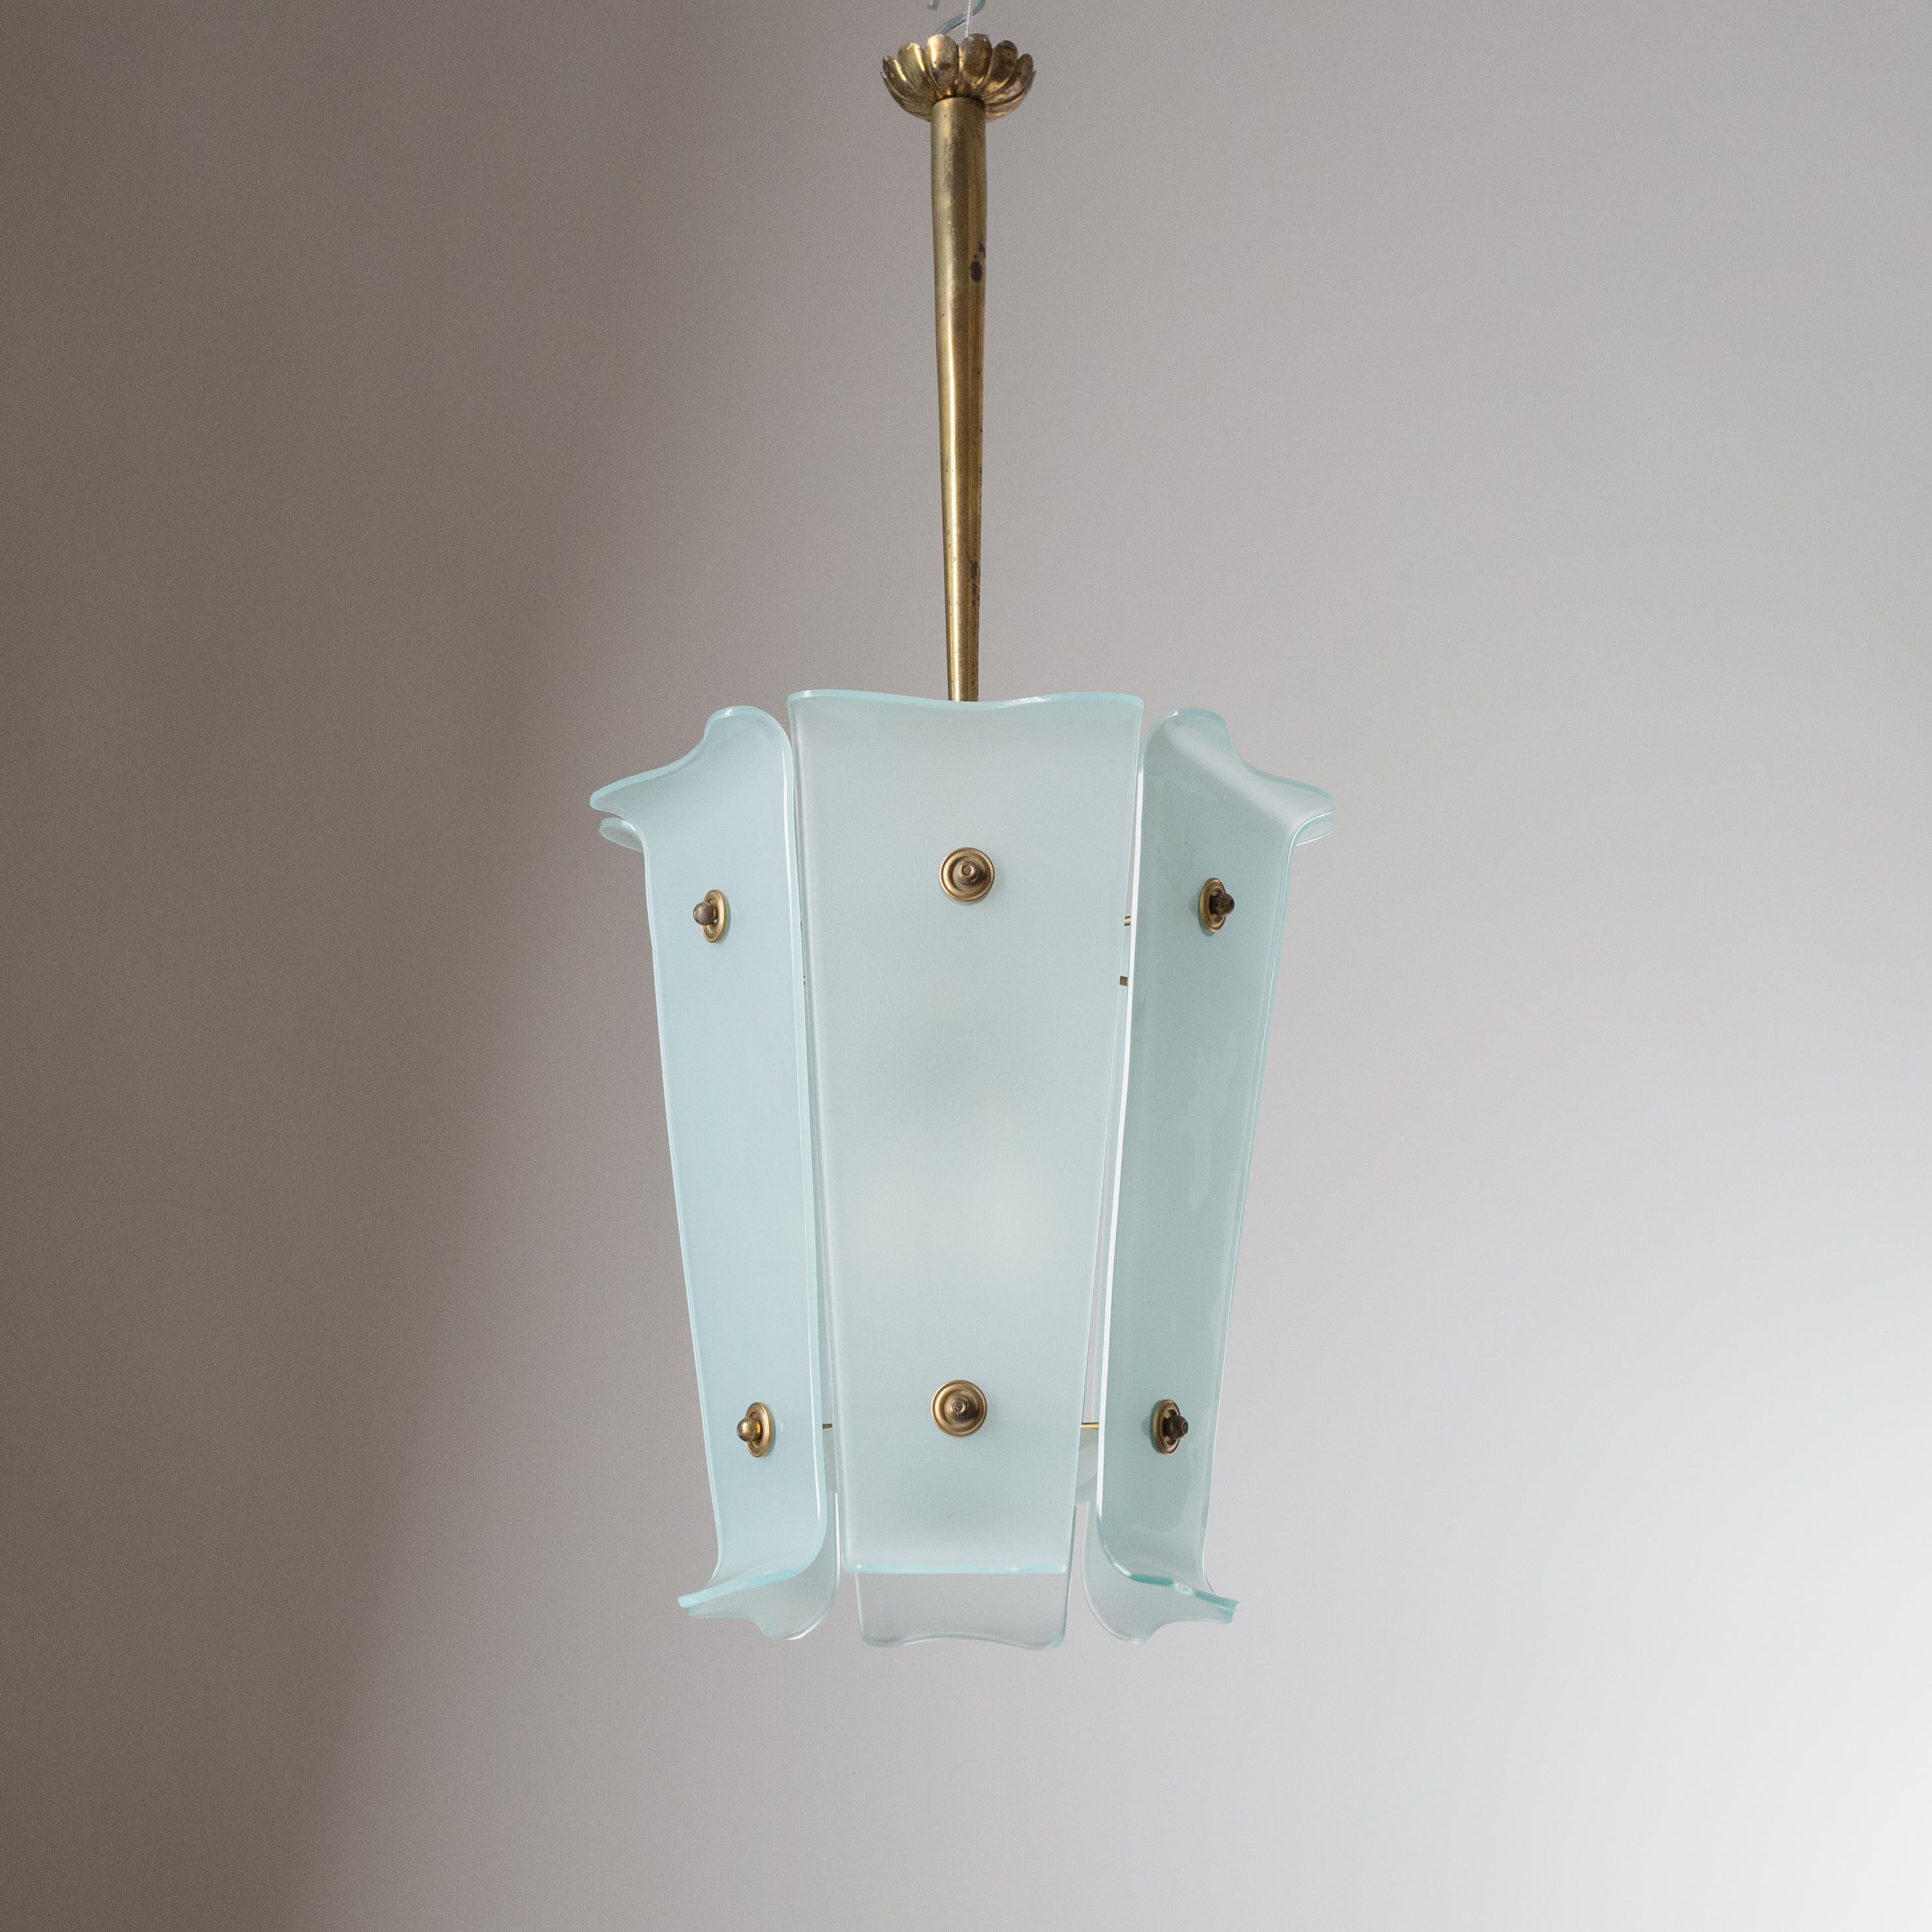 Rare glass lantern designed by Luigi Fontana in the 1930-1940s. Six tapered and curved pale-aquamarine glass panes are arranged around a delicate brass structure. Three original brass E14 sockets with new wiring. Glass height is 13.5inches/34cm.